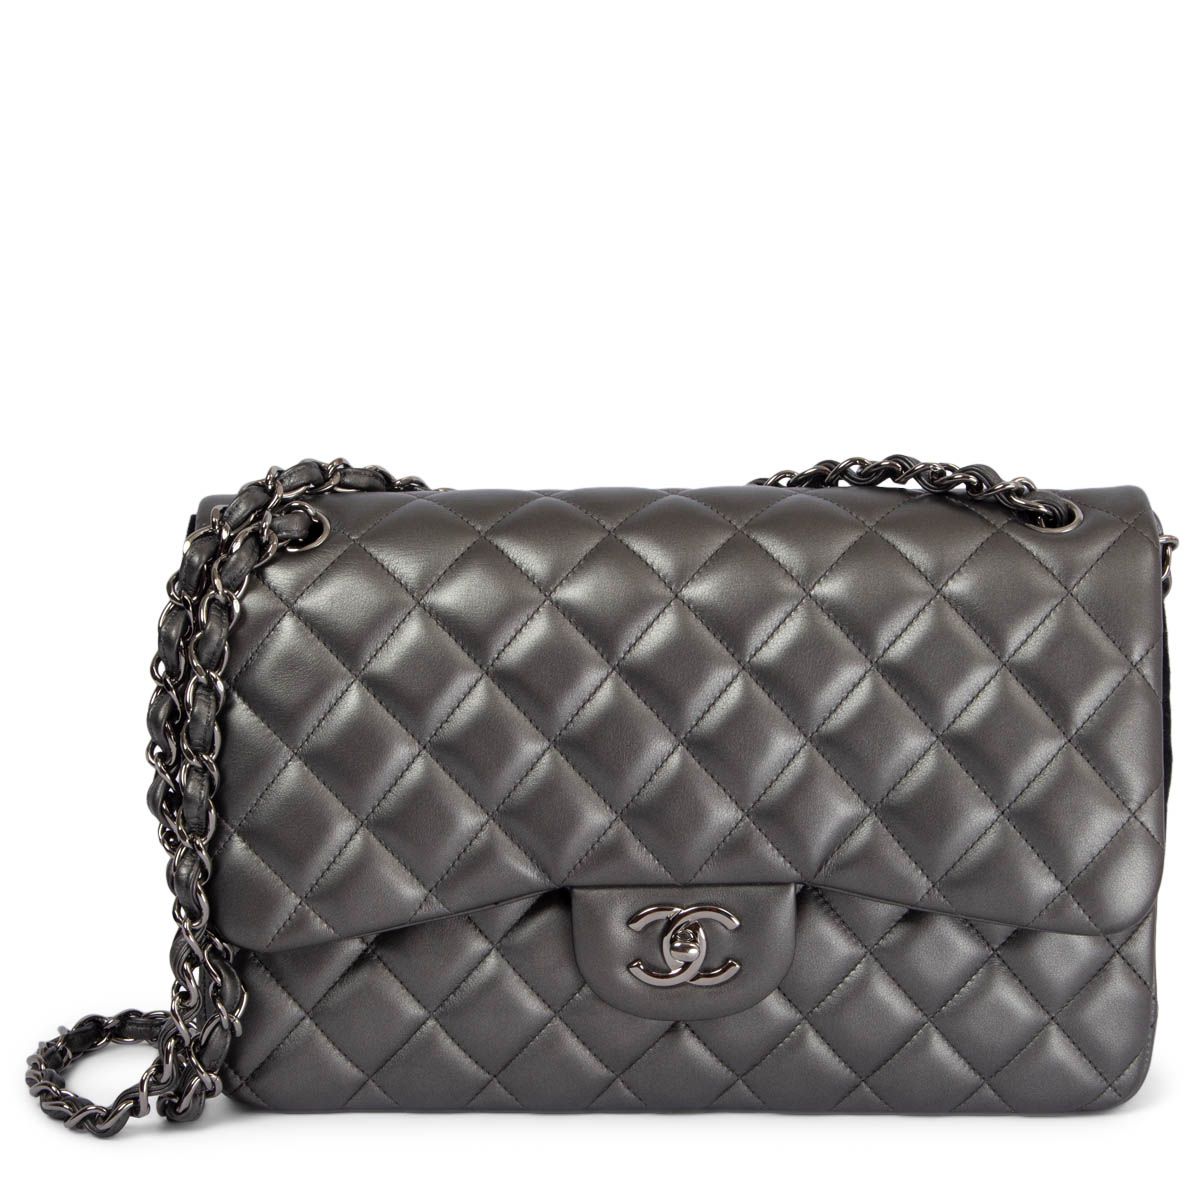 Chanel Classic Large Timeless Double Flap Bag Metallic